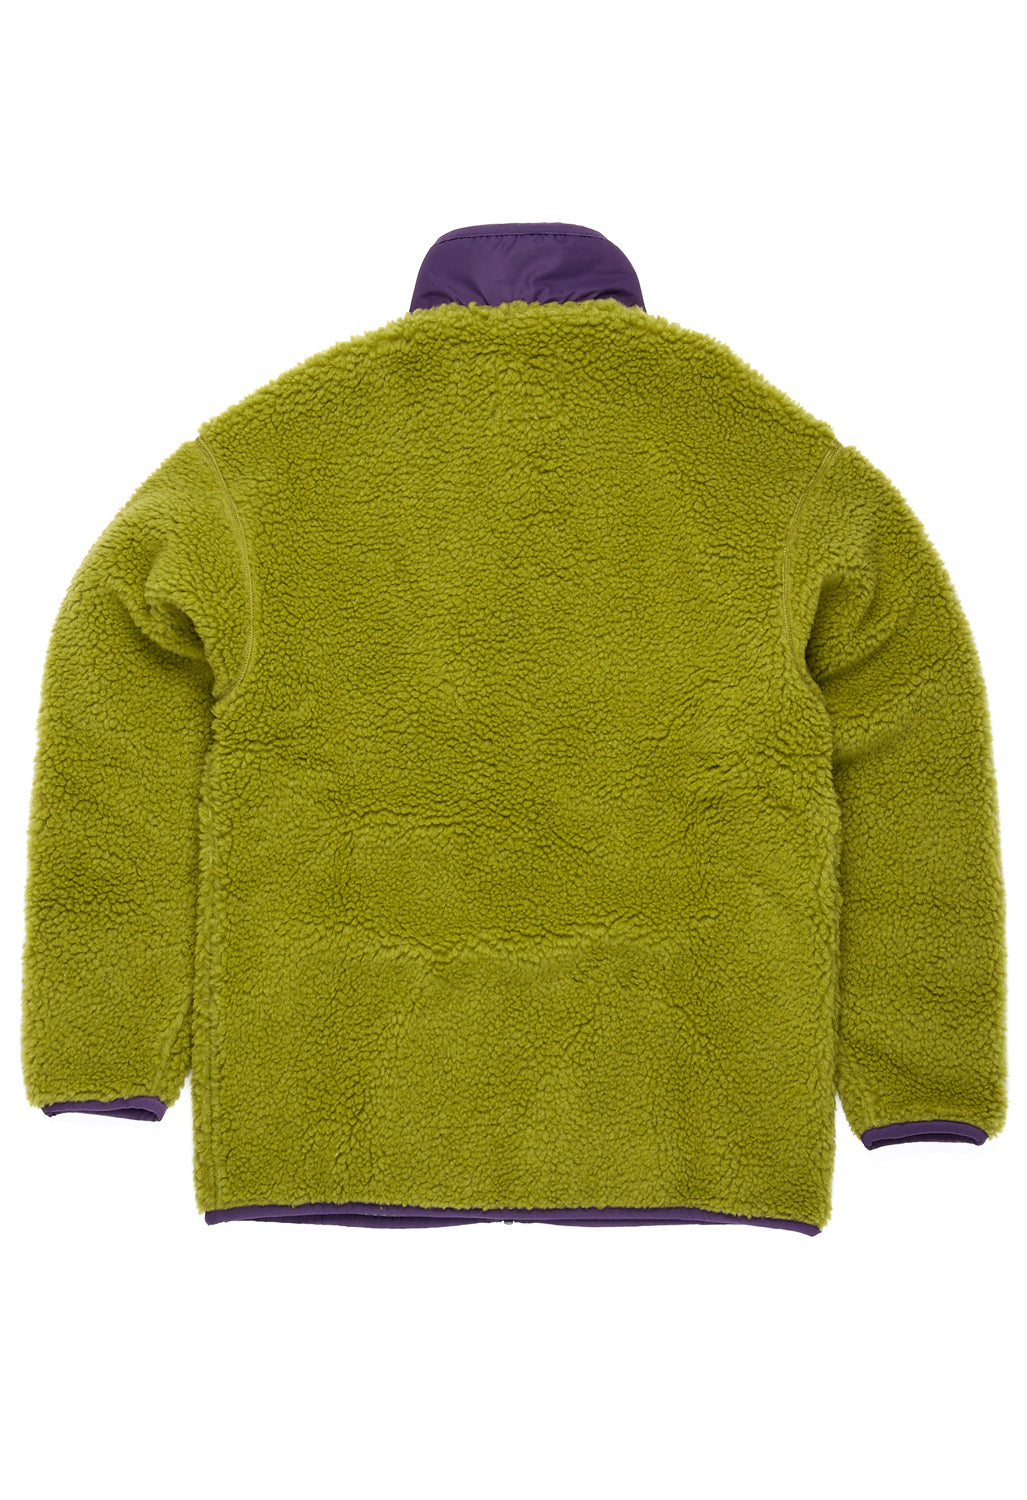 Gramicci Sherpa Jacket - Dusted Lime